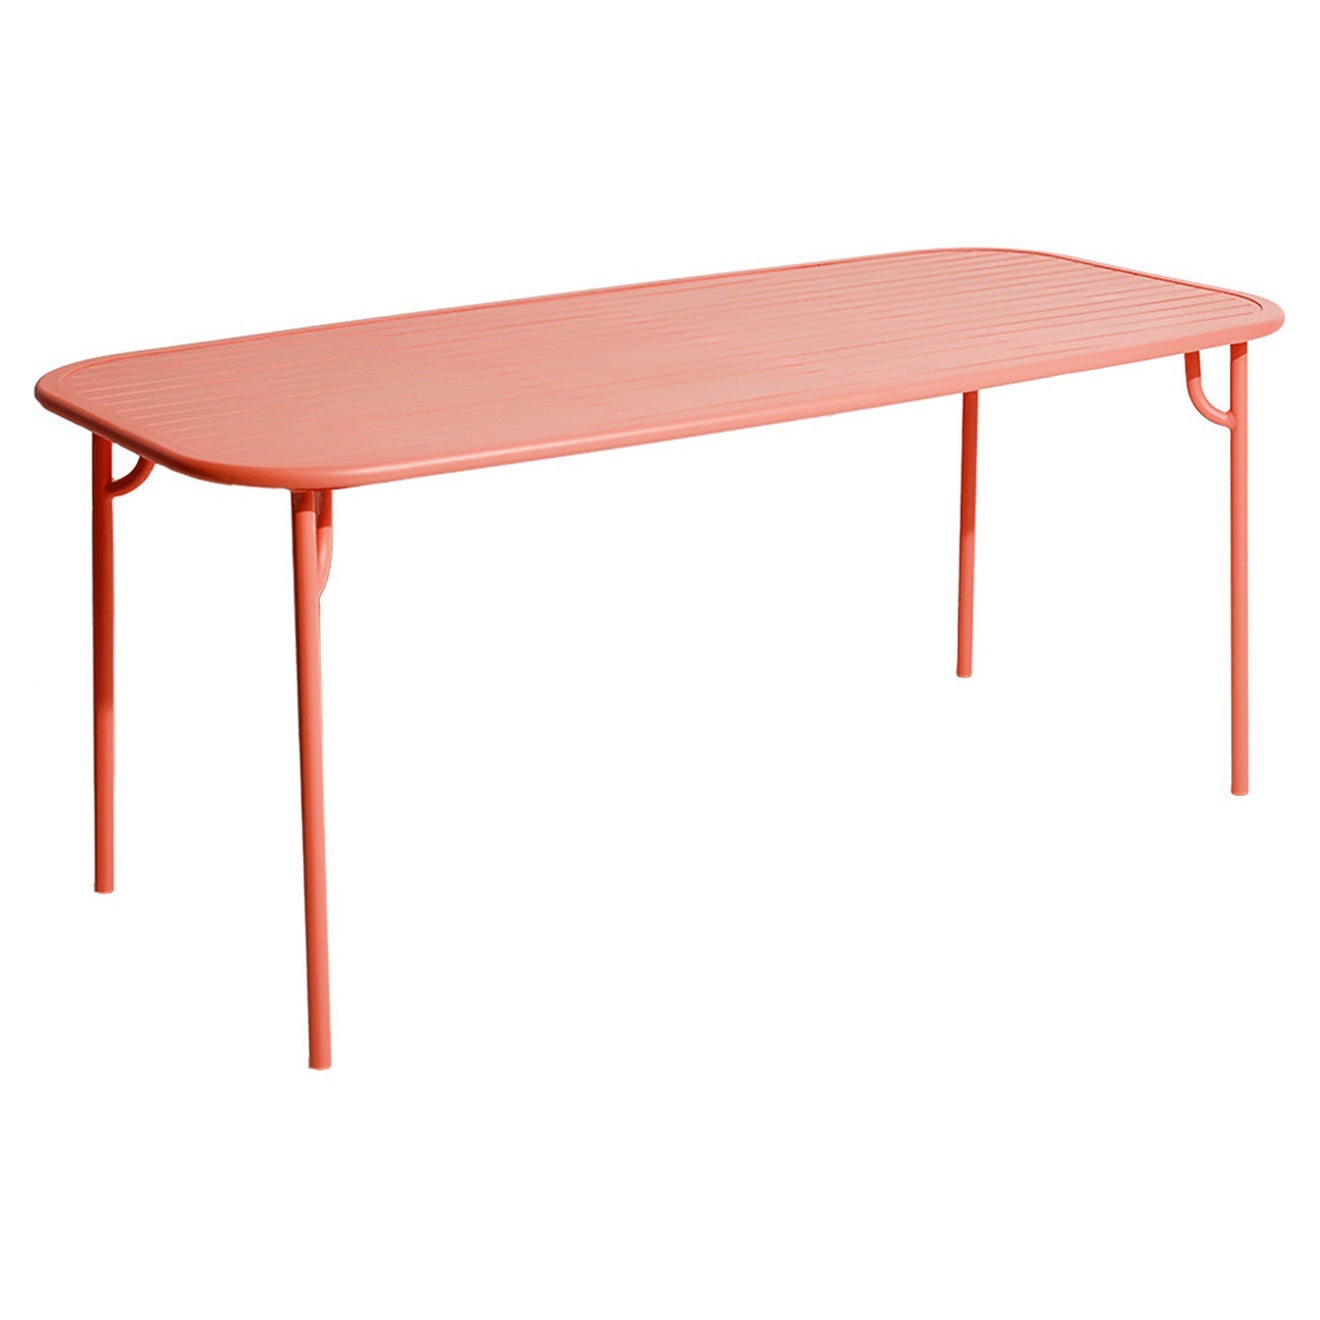 Petite Friture Week-End Medium Rectangular Dining Table in Coral with Slats